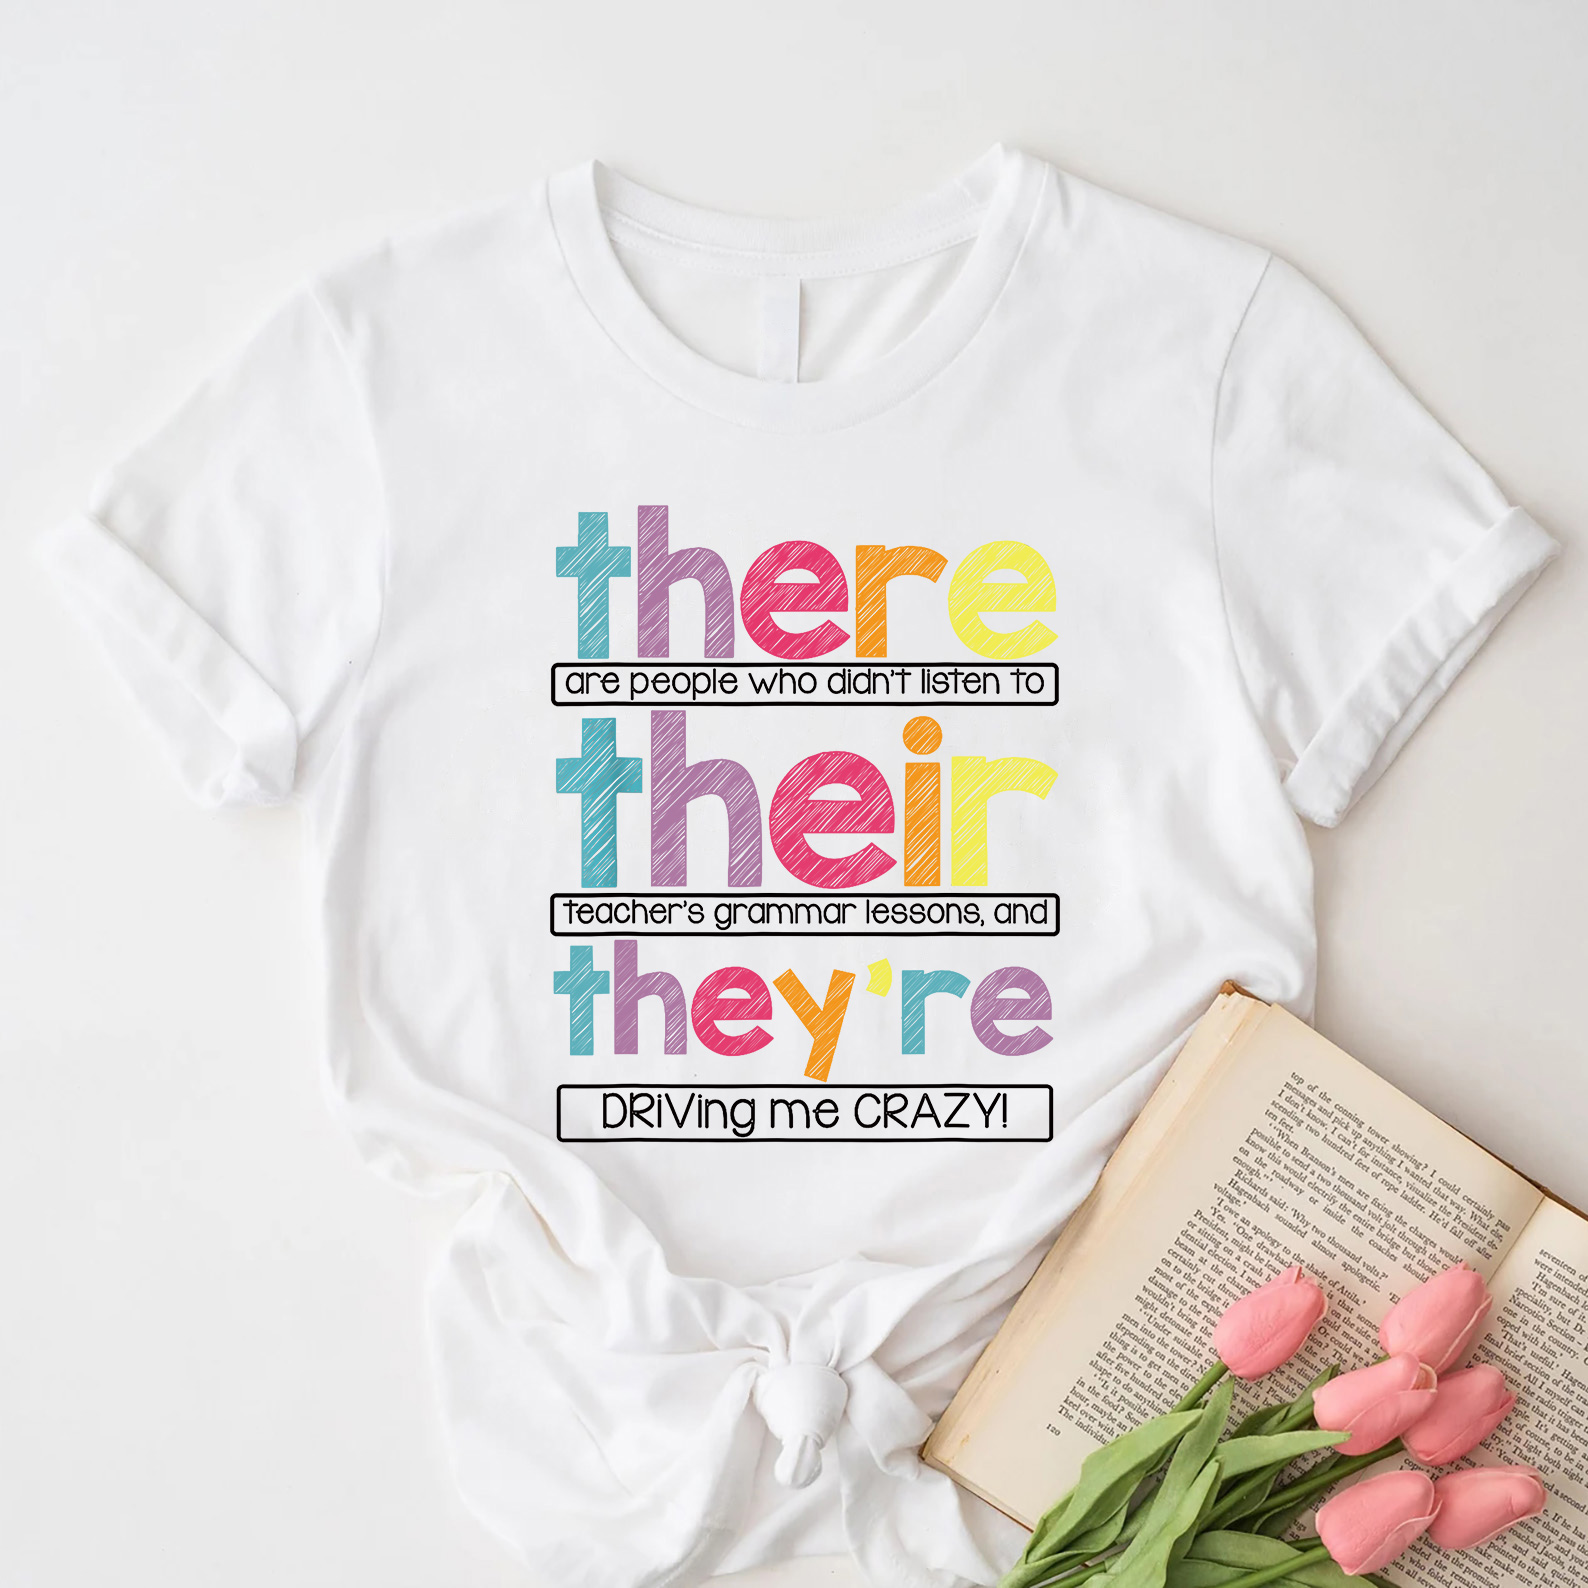 There Their They're Teacher T-Shirt